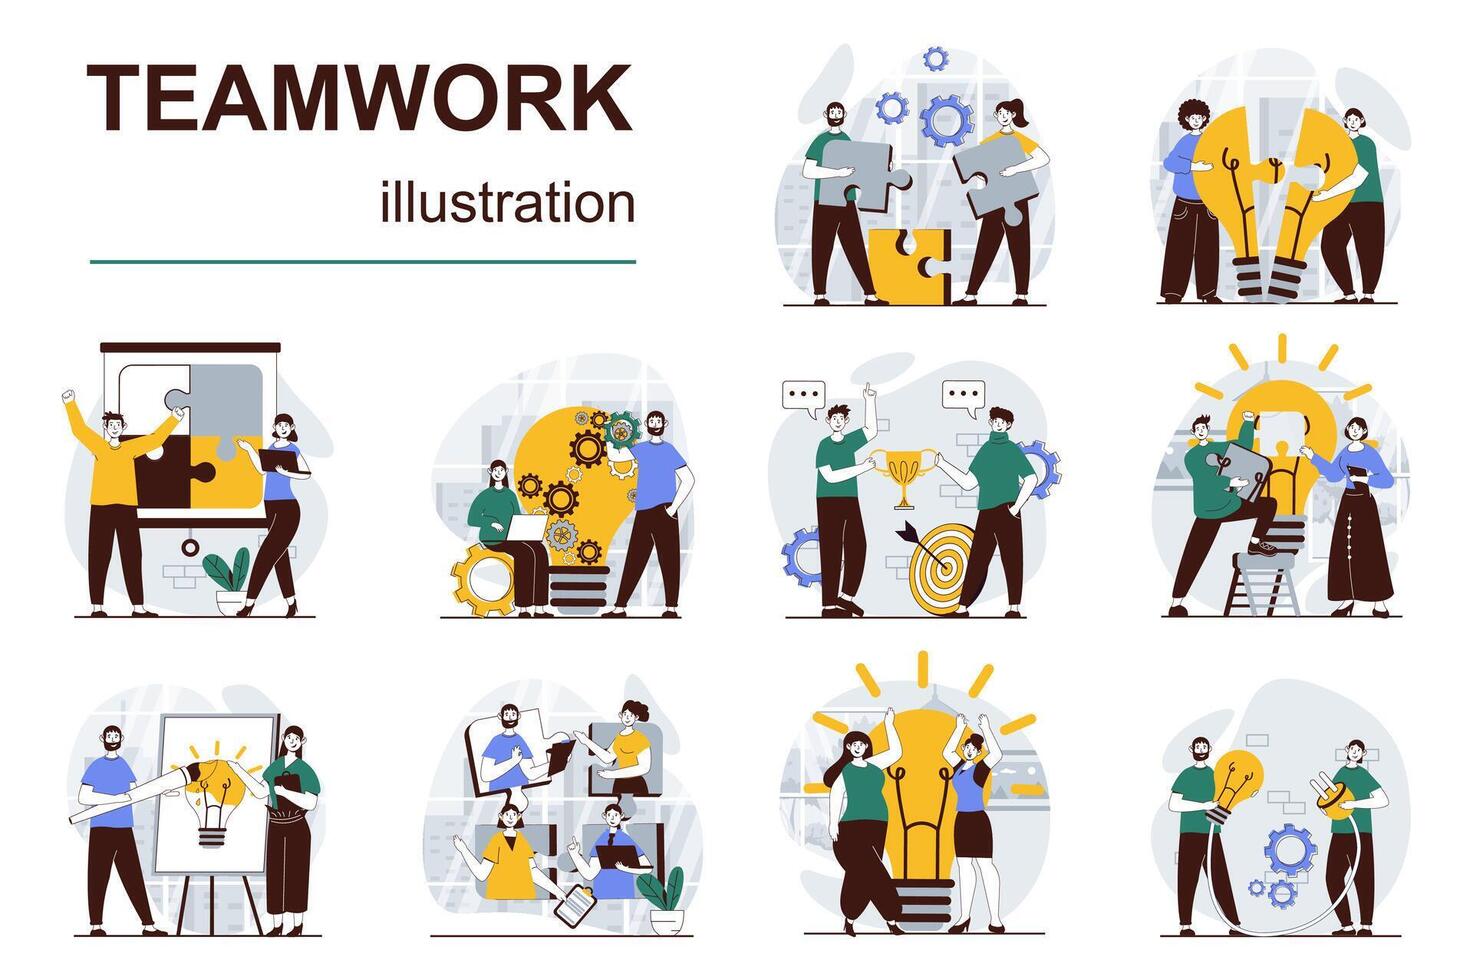 Teamwork concept with character situations mega set. Bundle of scenes people working together at projects, supporting colleagues, cooperation and partnership. Vector illustrations in flat web design